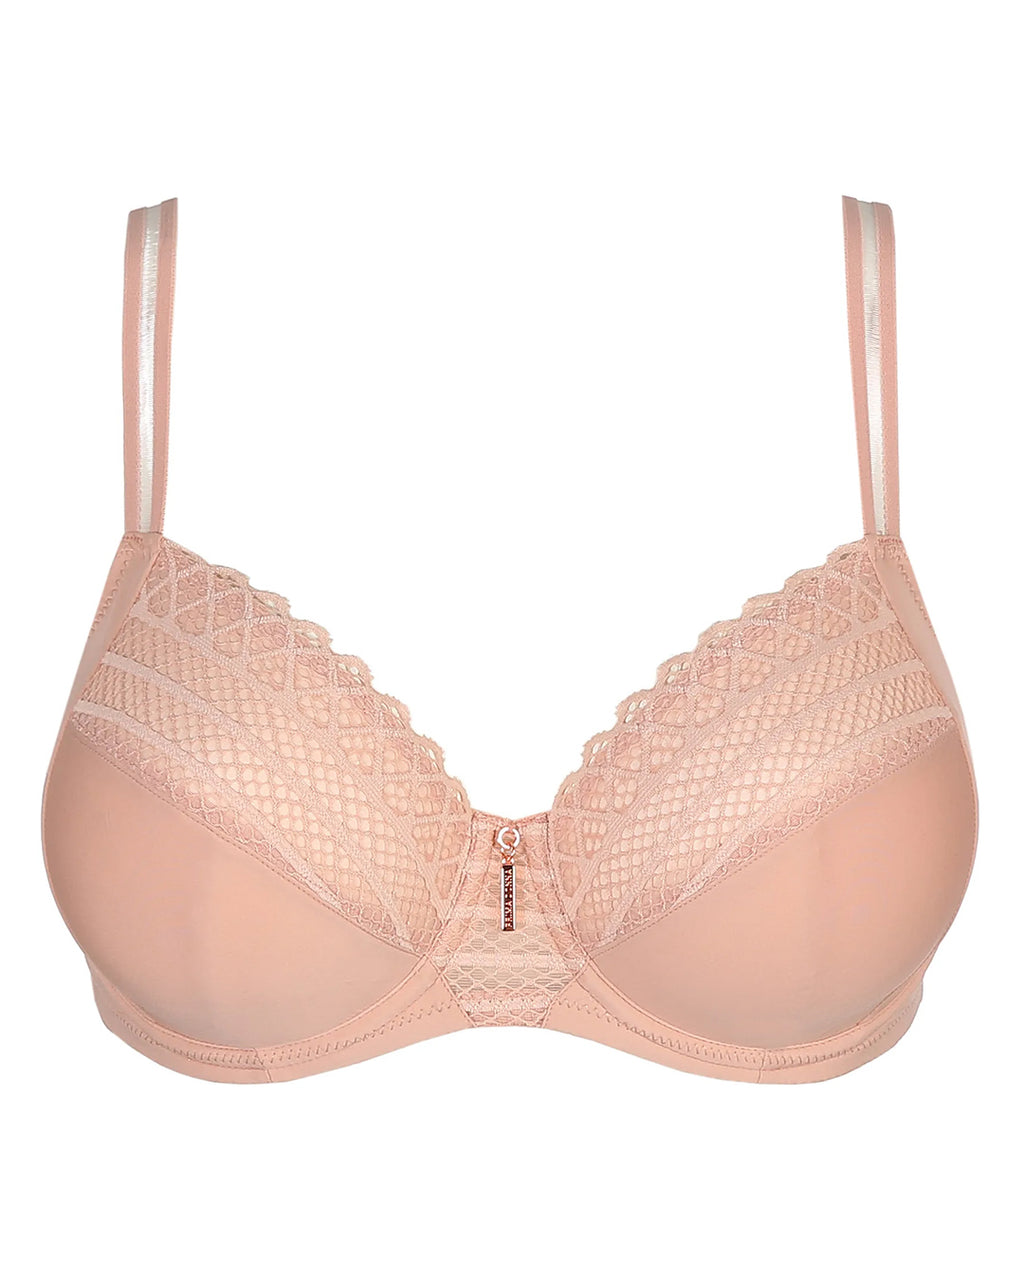 PrimaDonna DEAUVILLE Vintage Pink full cup body